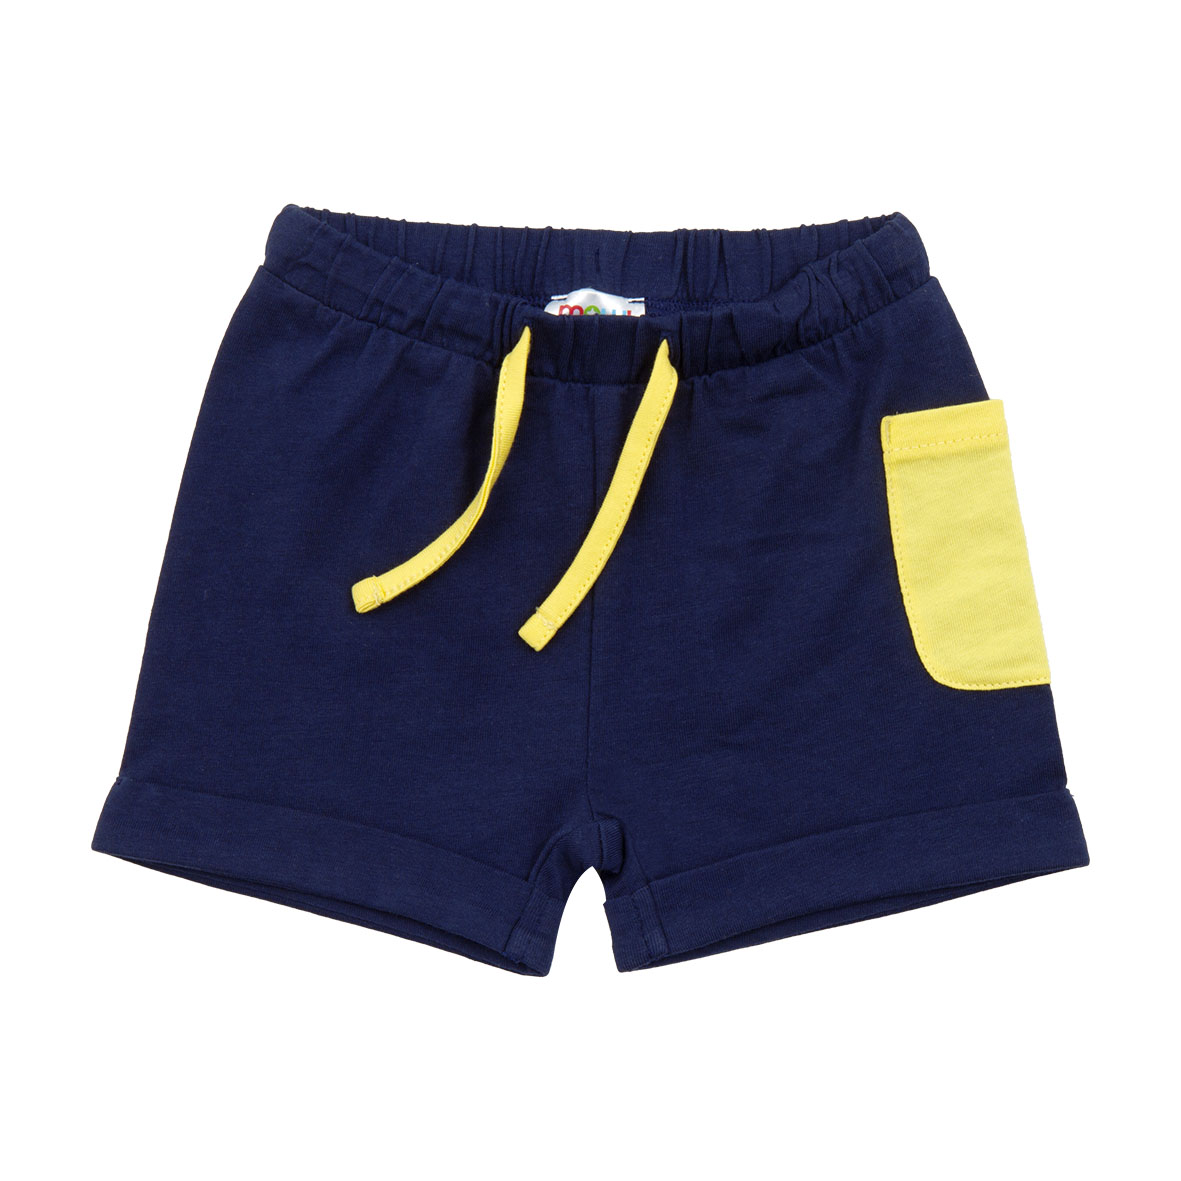 Mawi short jersey con tasca in contrasto - Mawi